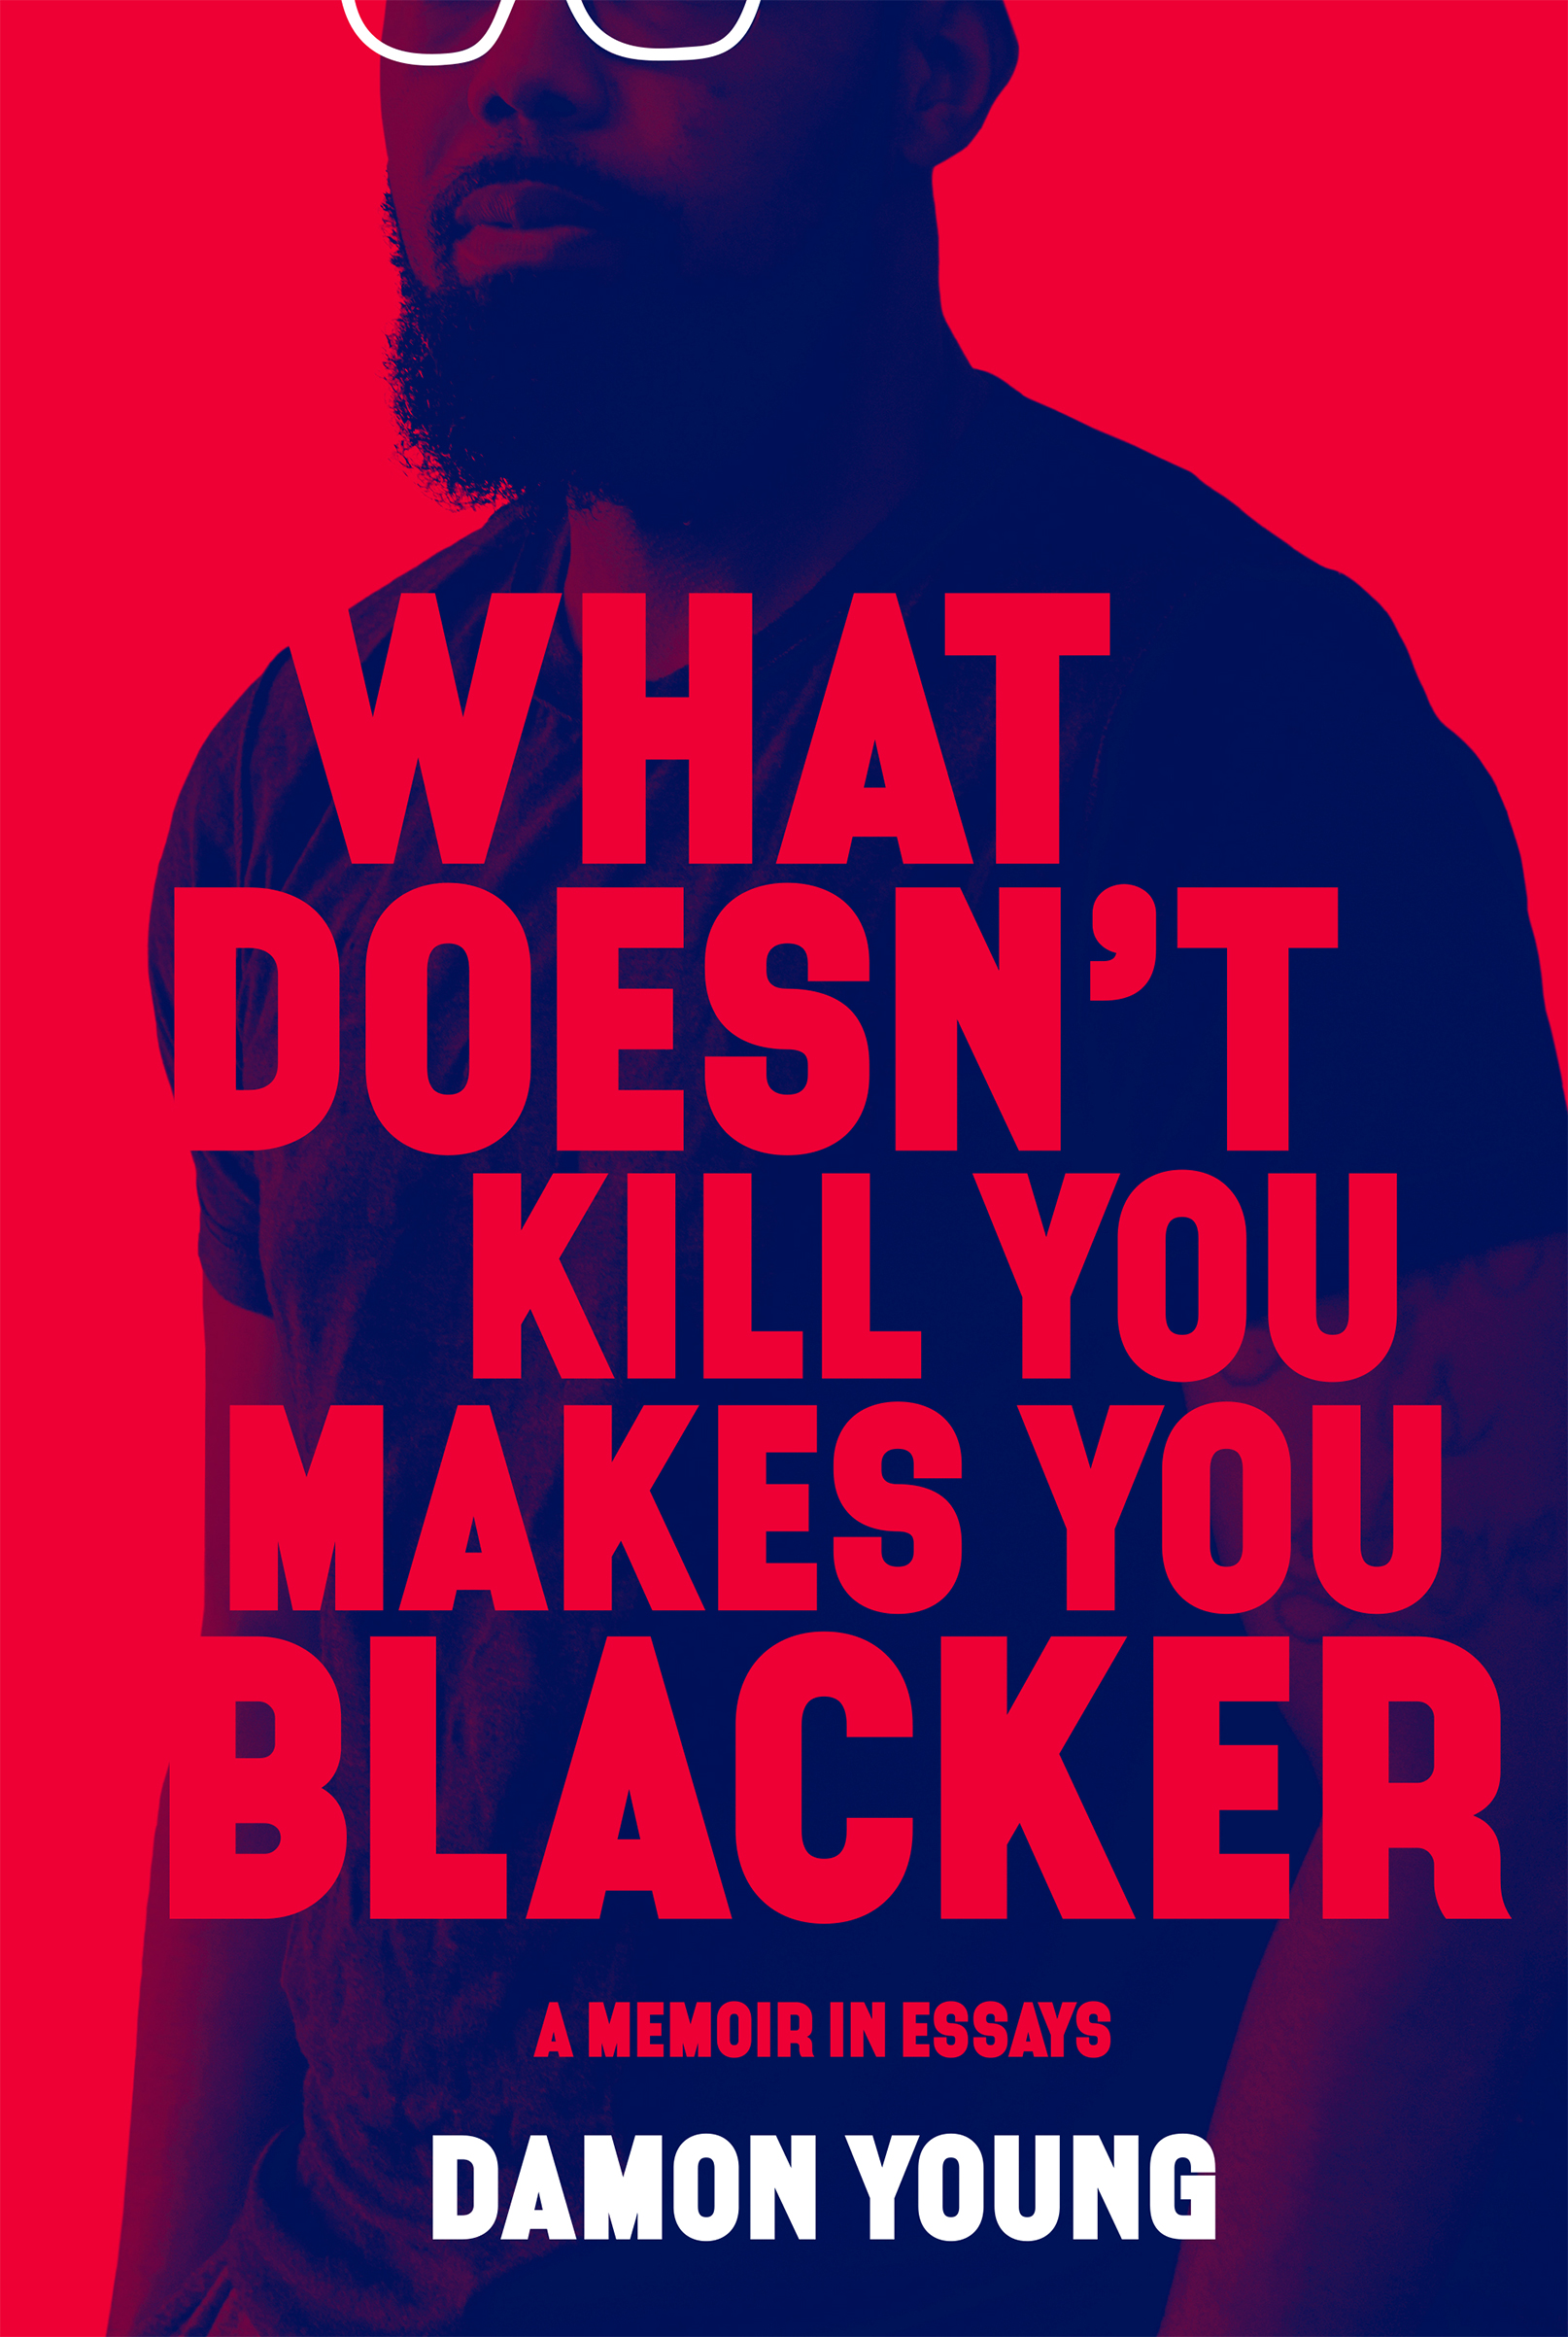 what-doesnt-kill-makes-blacker-book